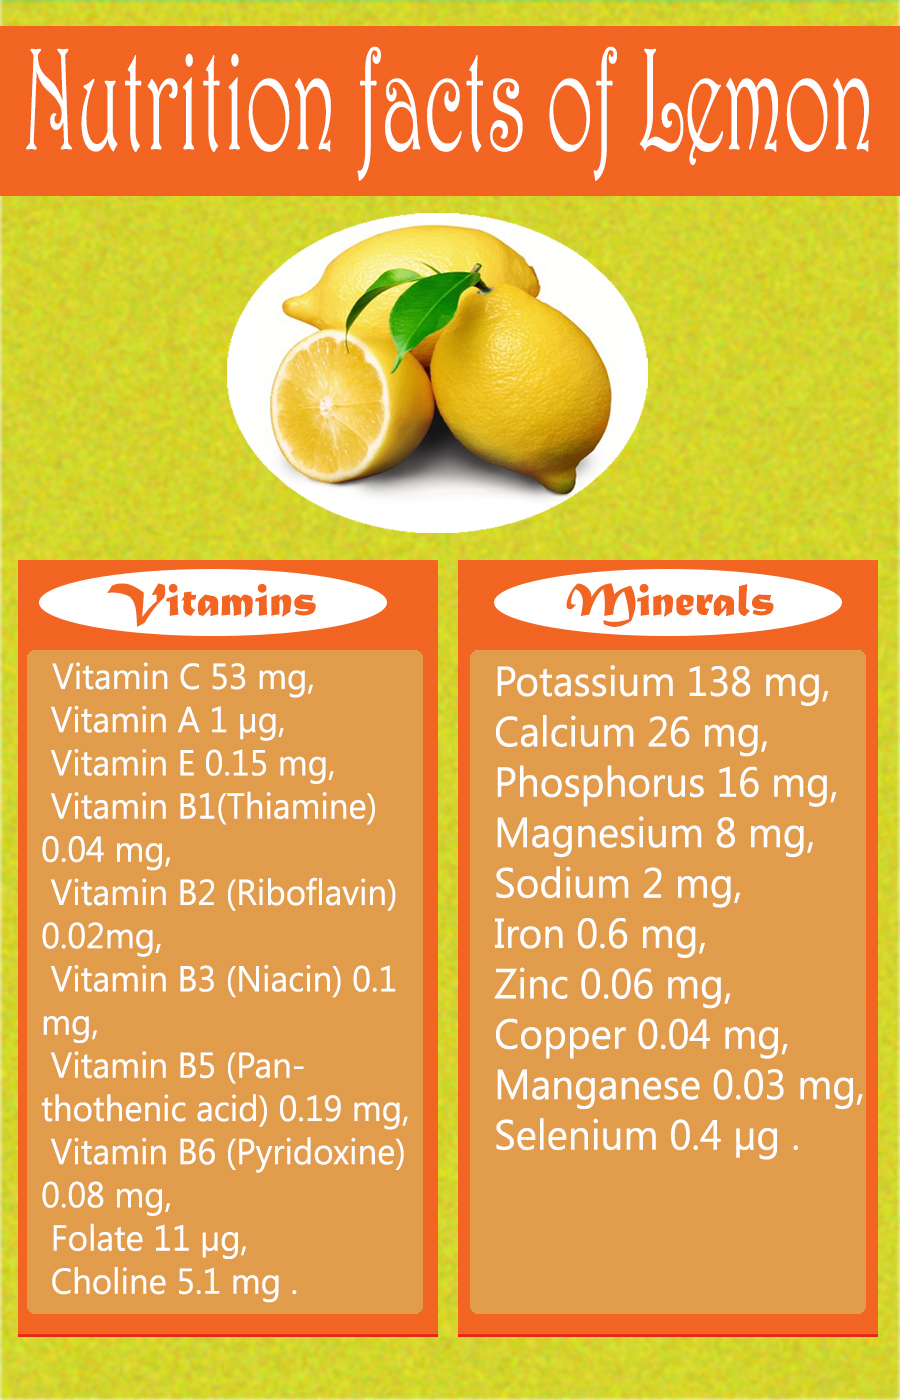 Lemon Nutrition facts and benefits